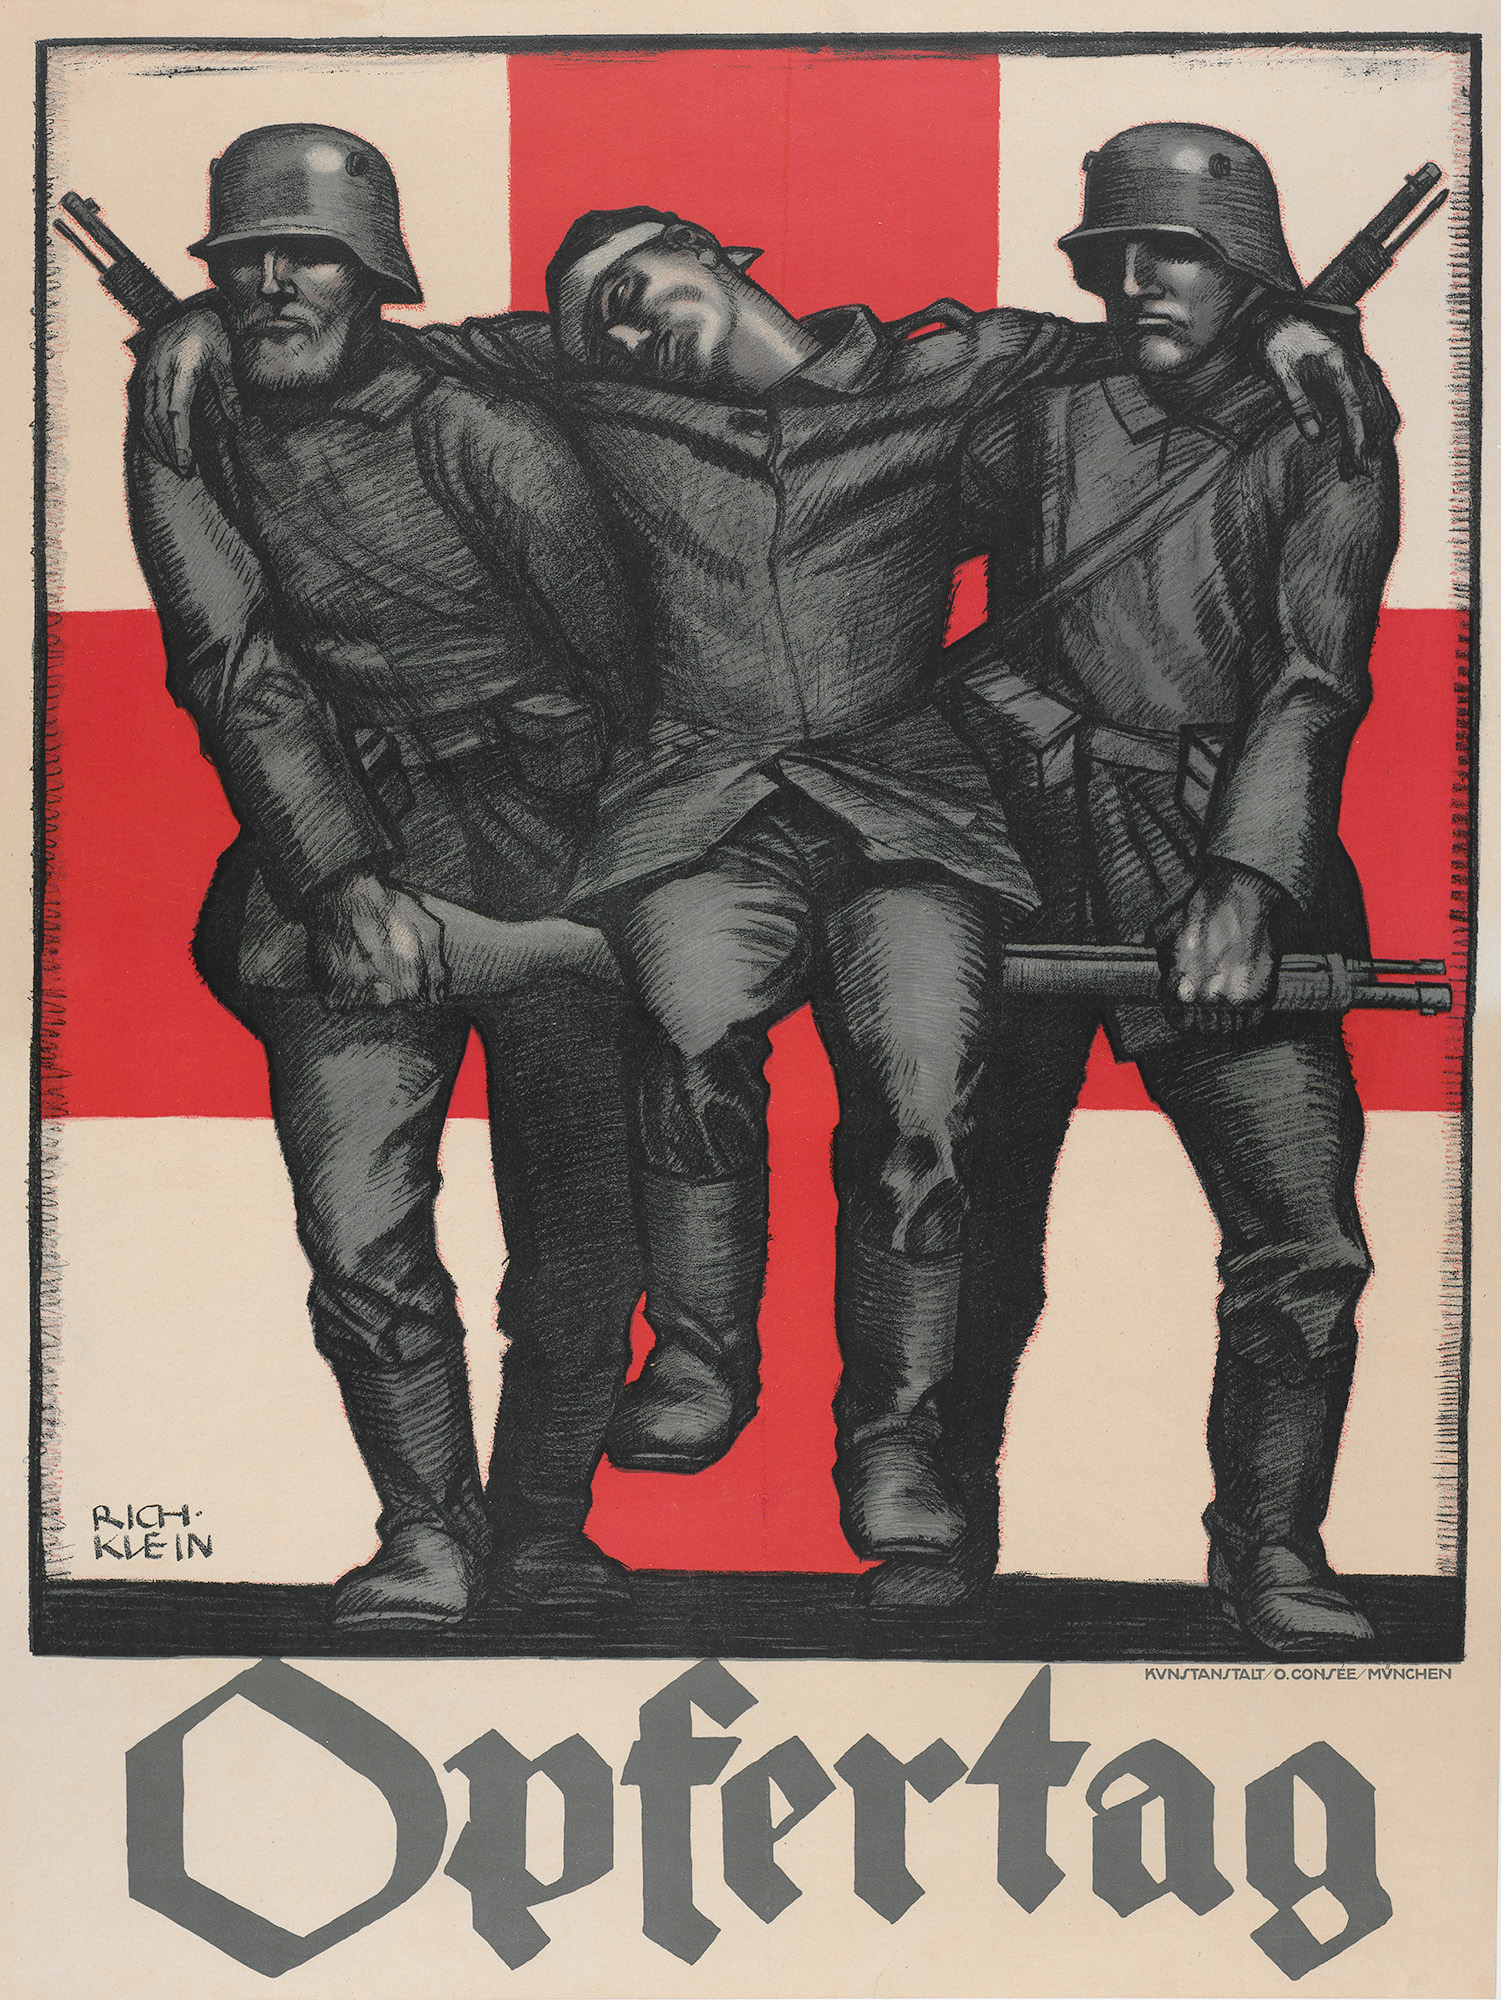 Scan of a poster. Image: Two soldiers carry a wounded soldier between them. Text: Opfertag